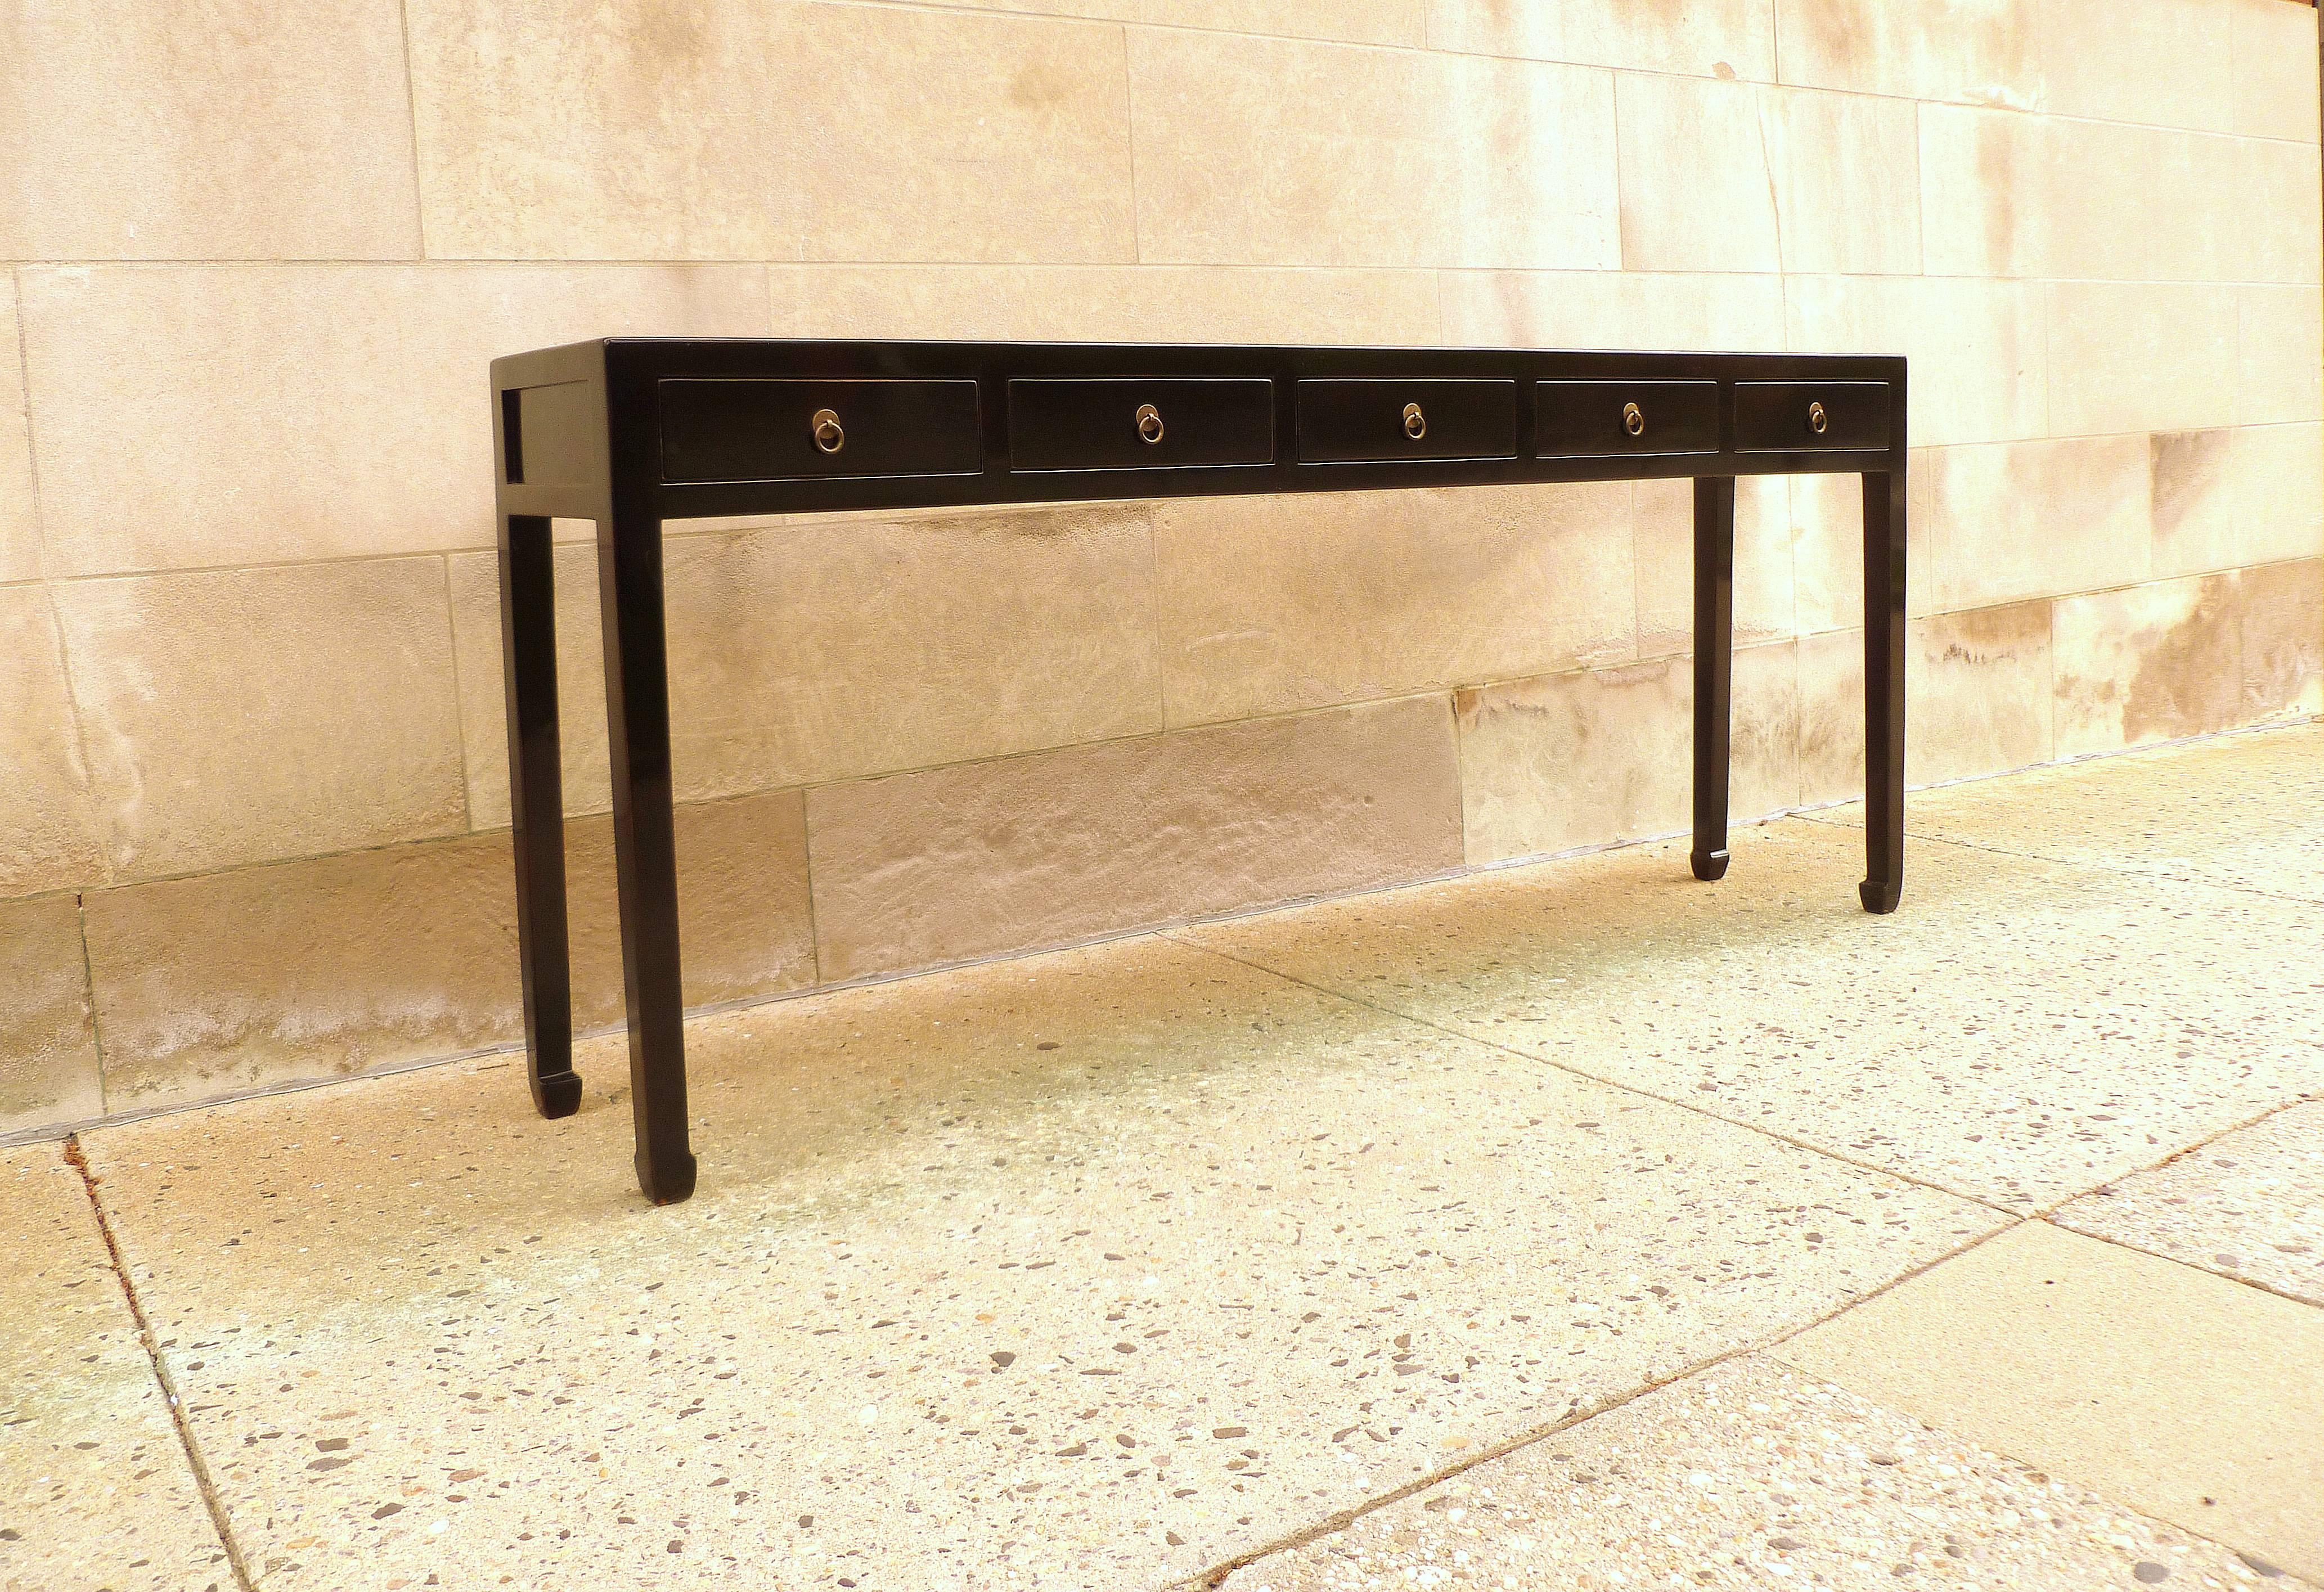 Chinese Fine Black Lacquer Console Table with Drawers